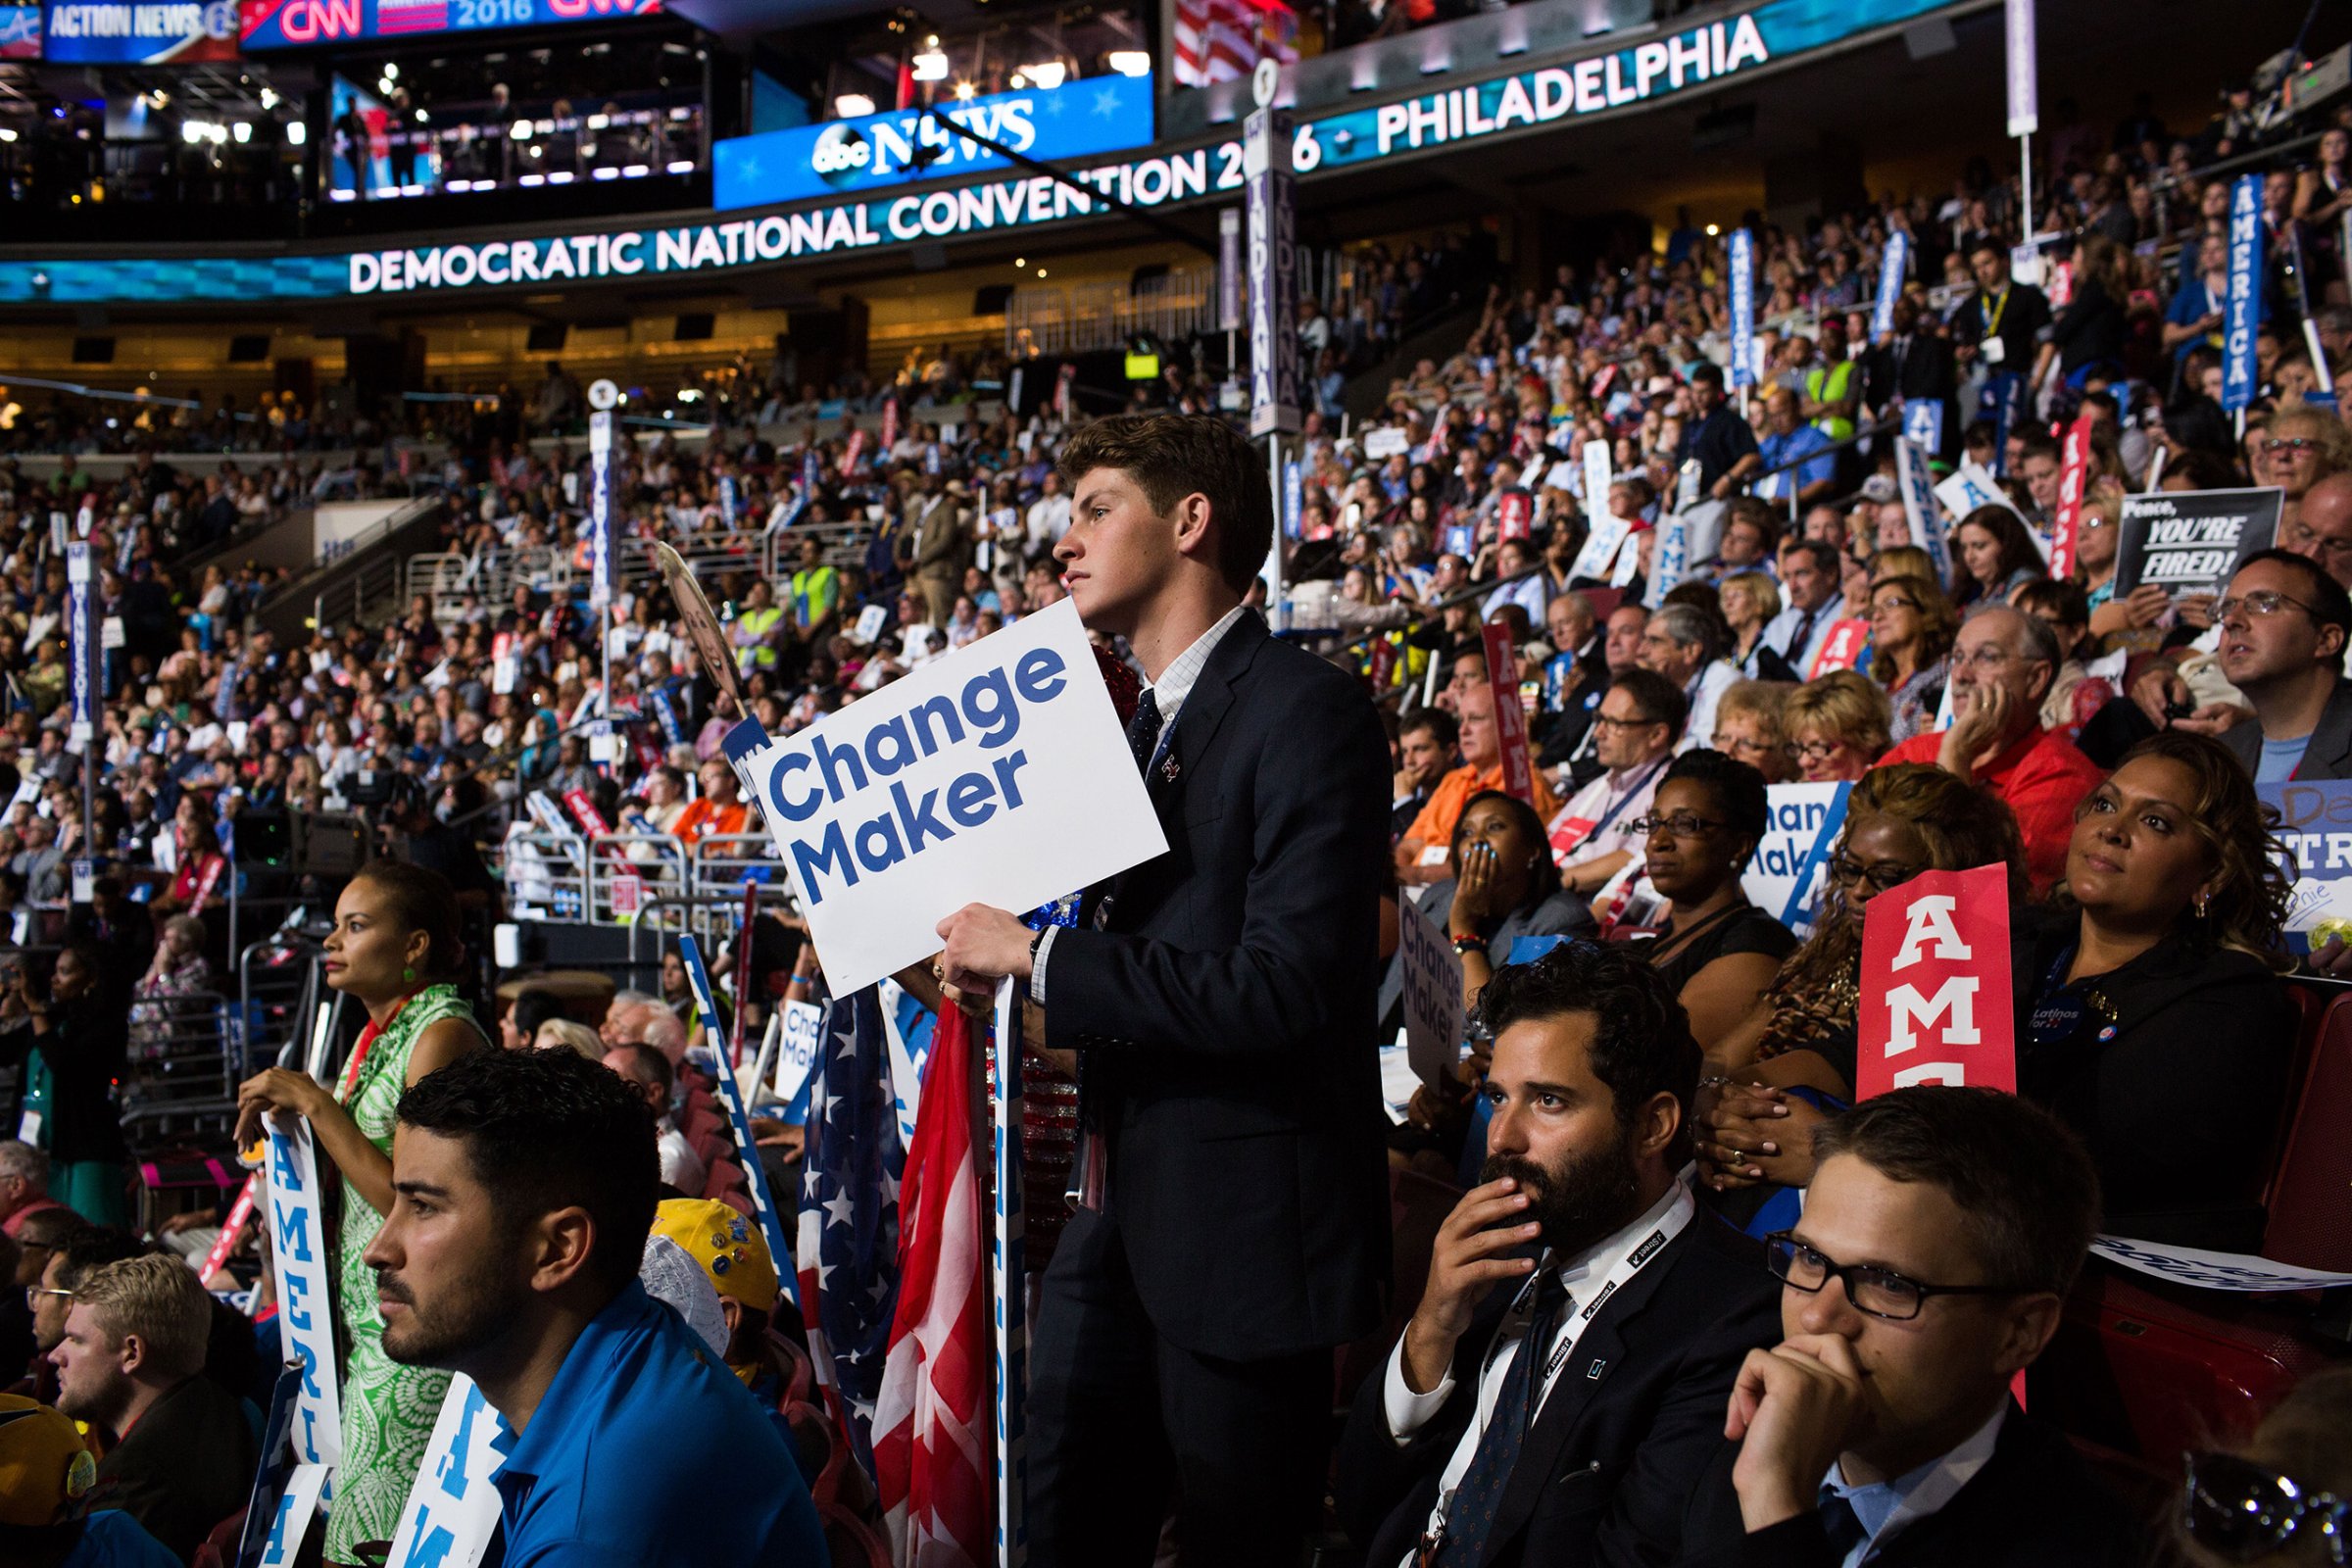 Tuesday night speakers and performers included Bill Clinton, Alicia Keyes, and Meryl Streetp at the Democratic National Convention at the Wells Fargo Center on July 26, 2016 in Philadelphia.(Natalie Keyssar for TIME)